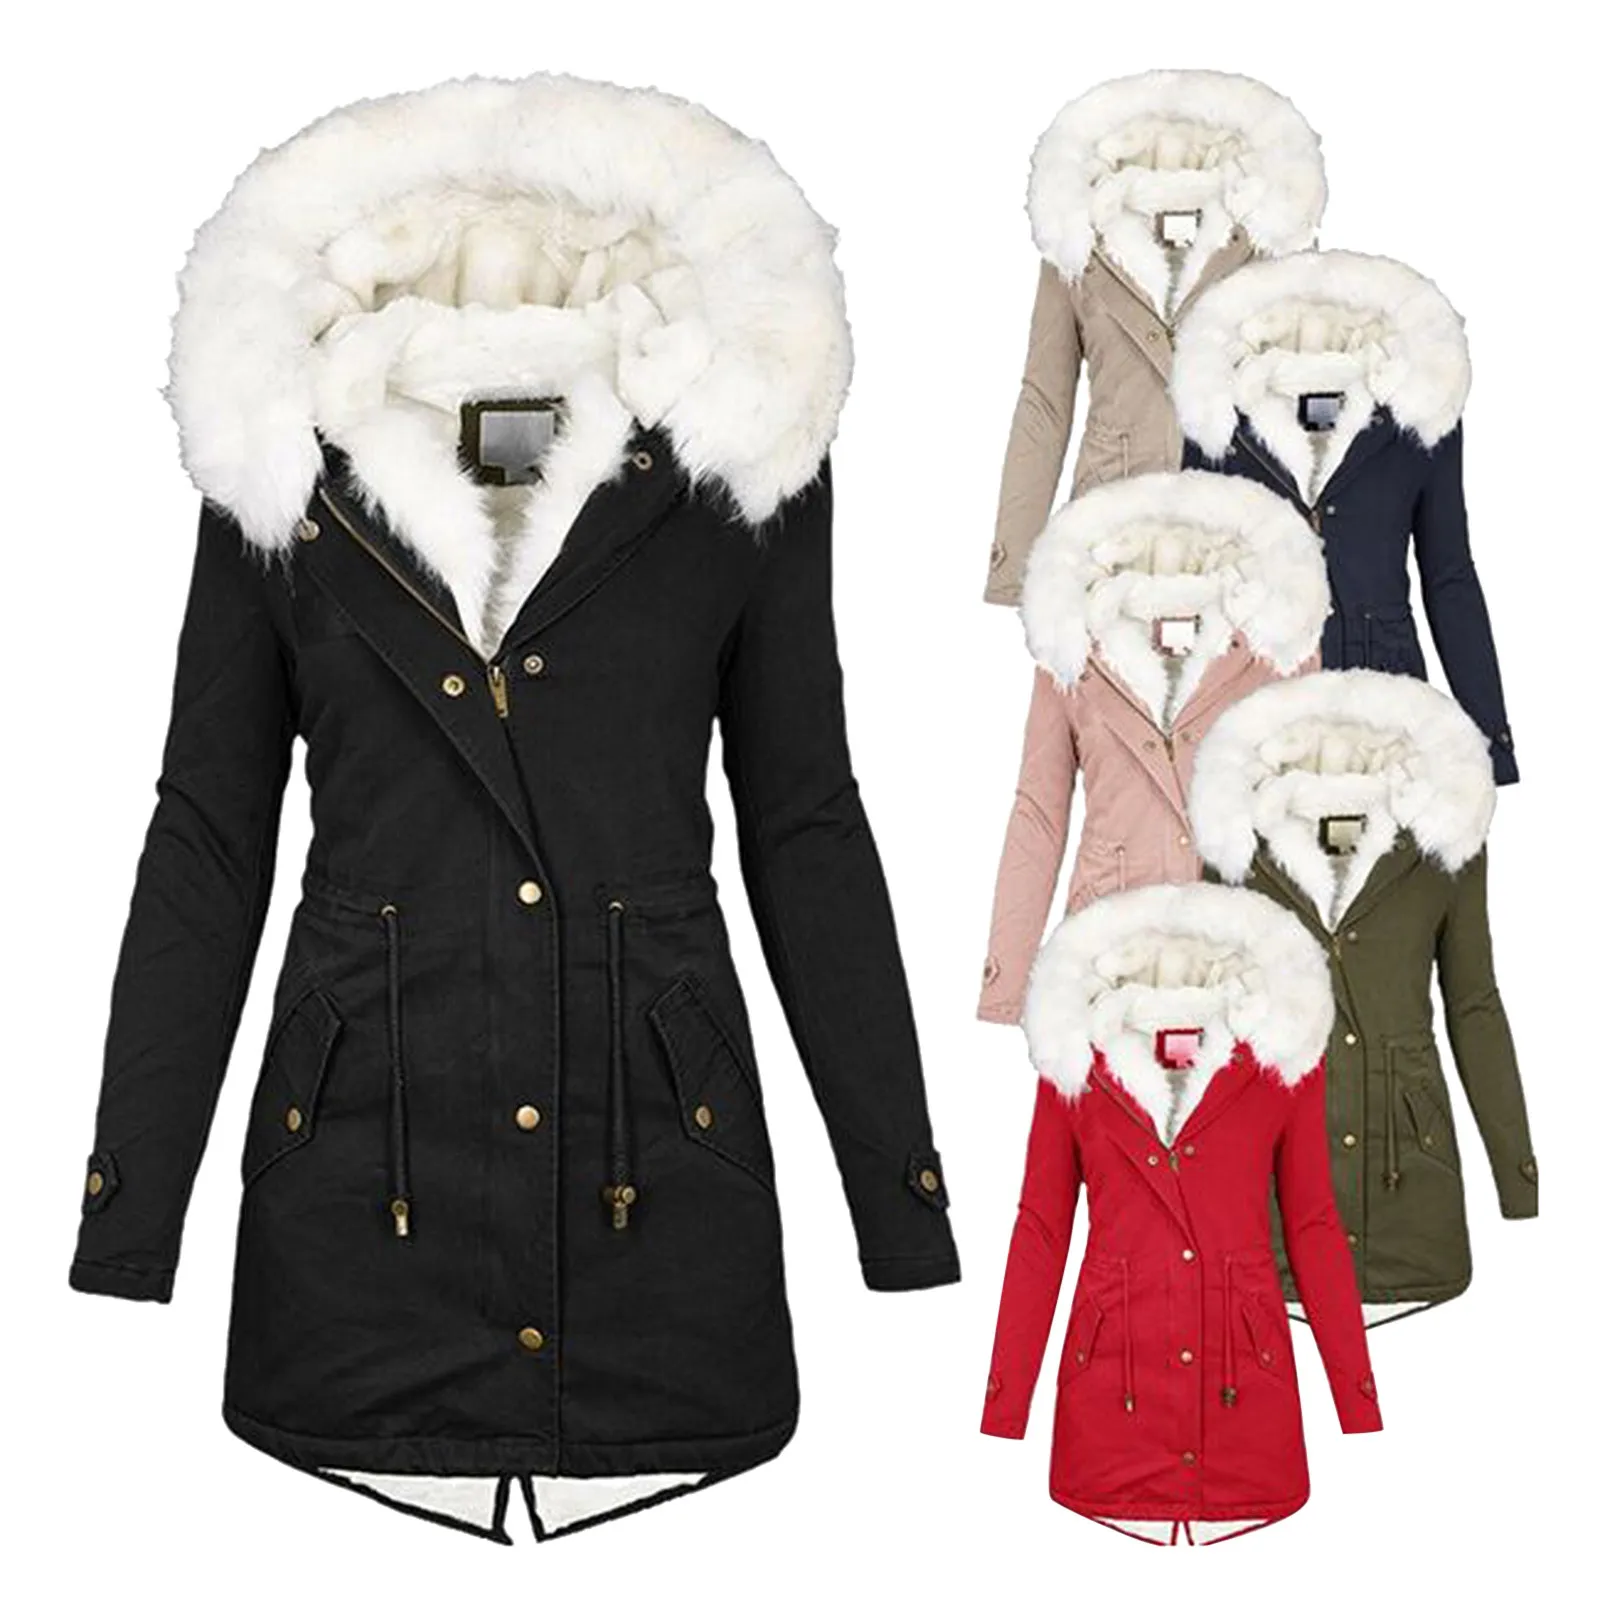 

Winter Thick Warm Teddy Coat Woman Lapel Long Sleeve Fluffy Hairy Fake Fur Jackets Female Button Pockets Zipper Thick Overcoat